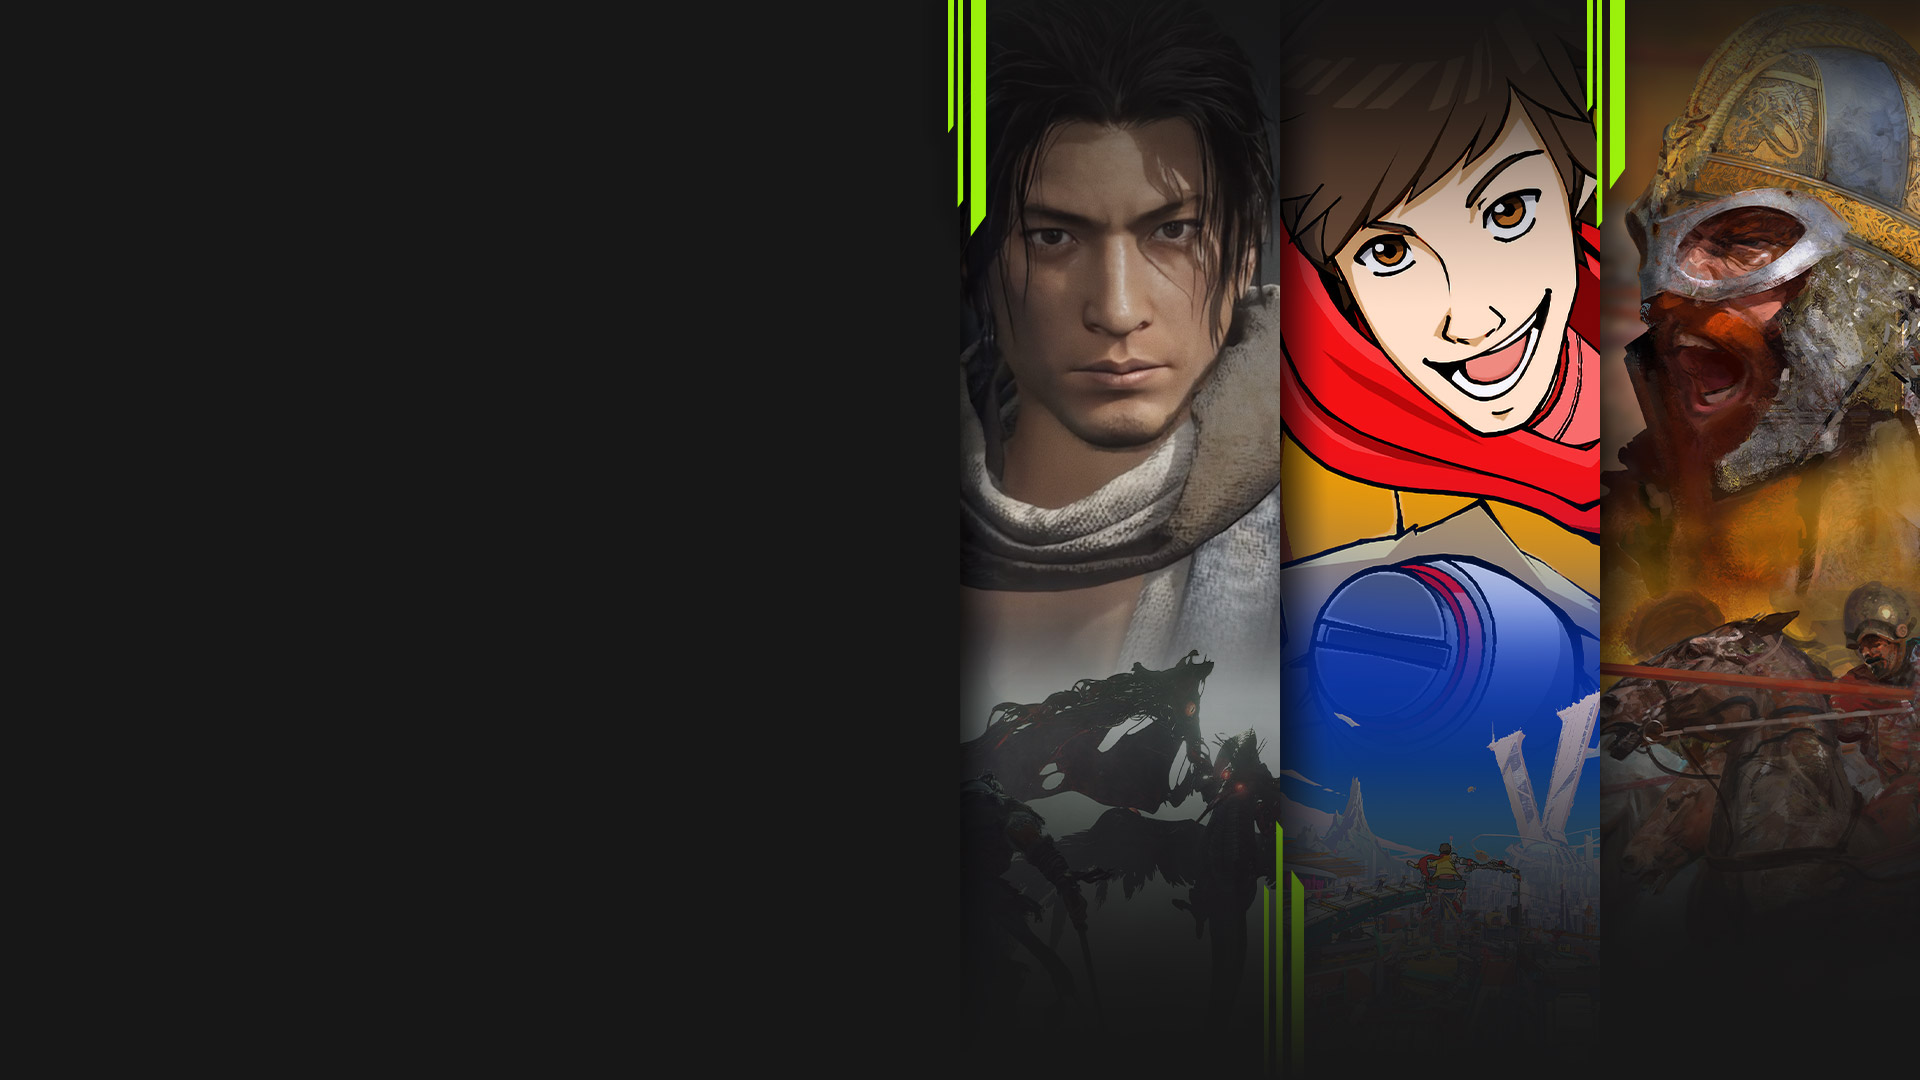 Game art from multiple games available now with Xbox Game Pass, including Wo Long: Fallen Dynasty, Hi-Fi Rush, Age of Empires II: Definitive Edition, and Disney Dreamlight Valley.